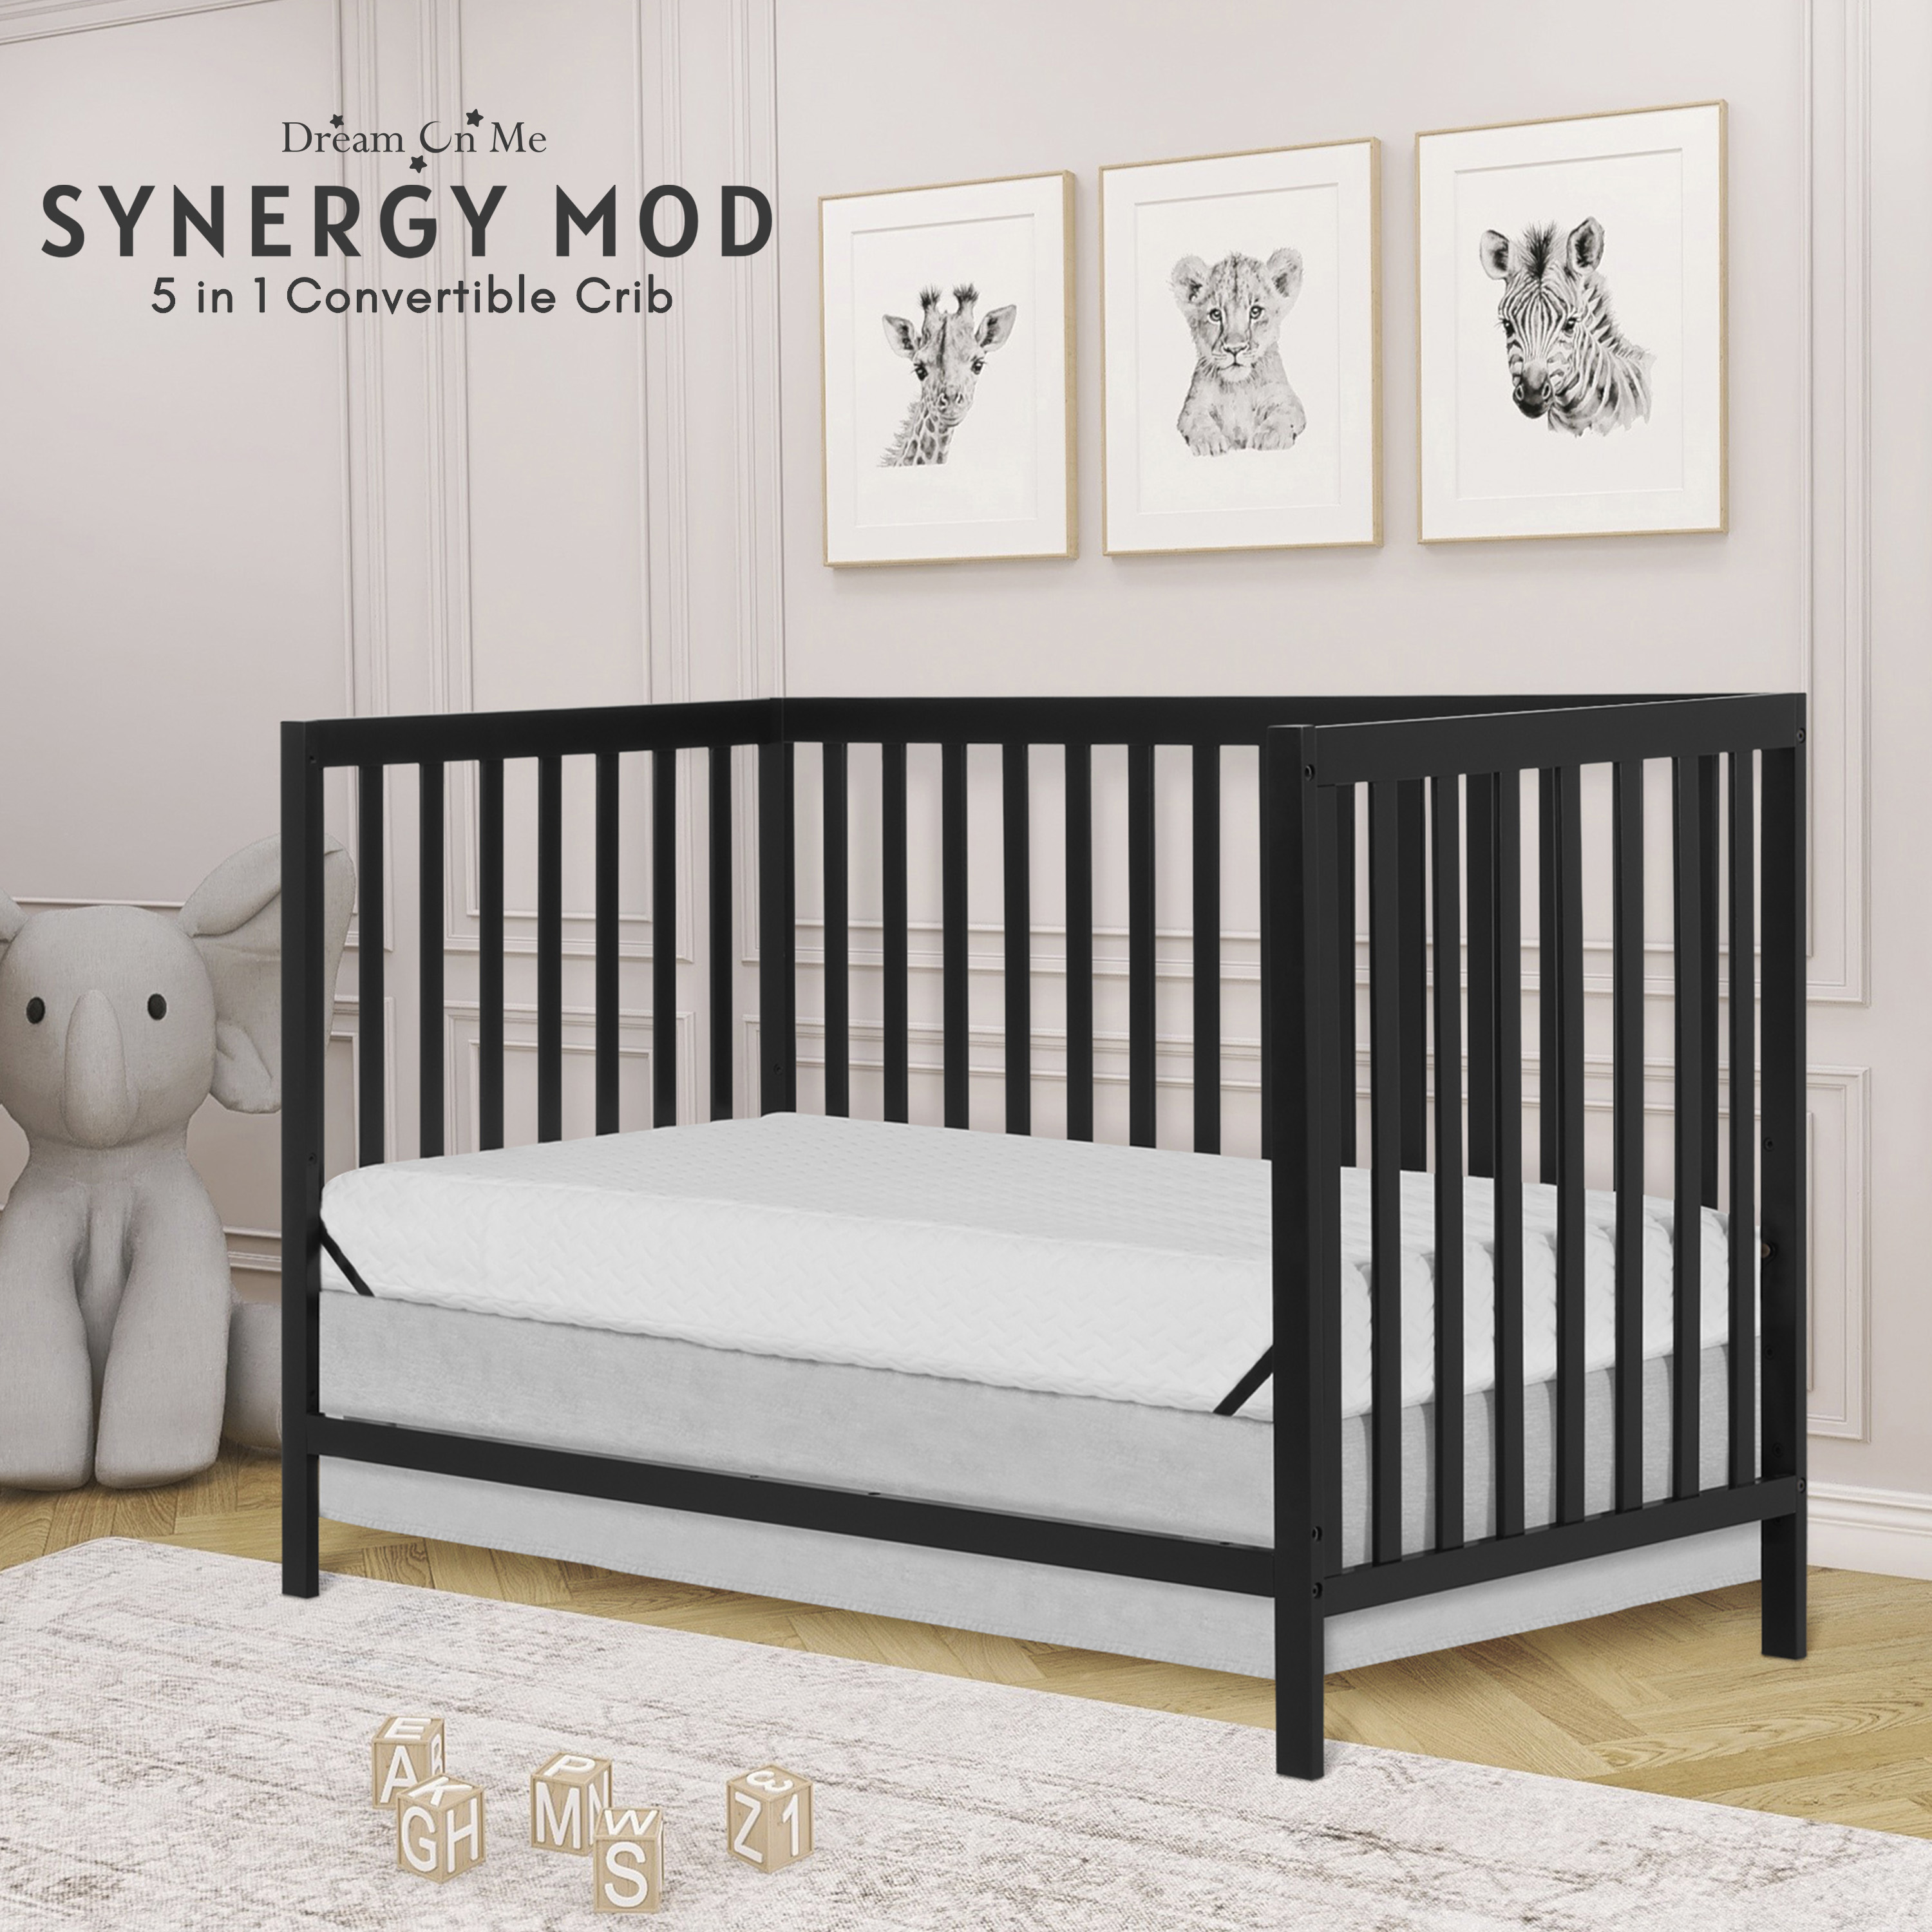 Dream On Me Synergy MOD Crib, Made with Sustainable New Zealand Pinewood, Matte Black - image 5 of 9